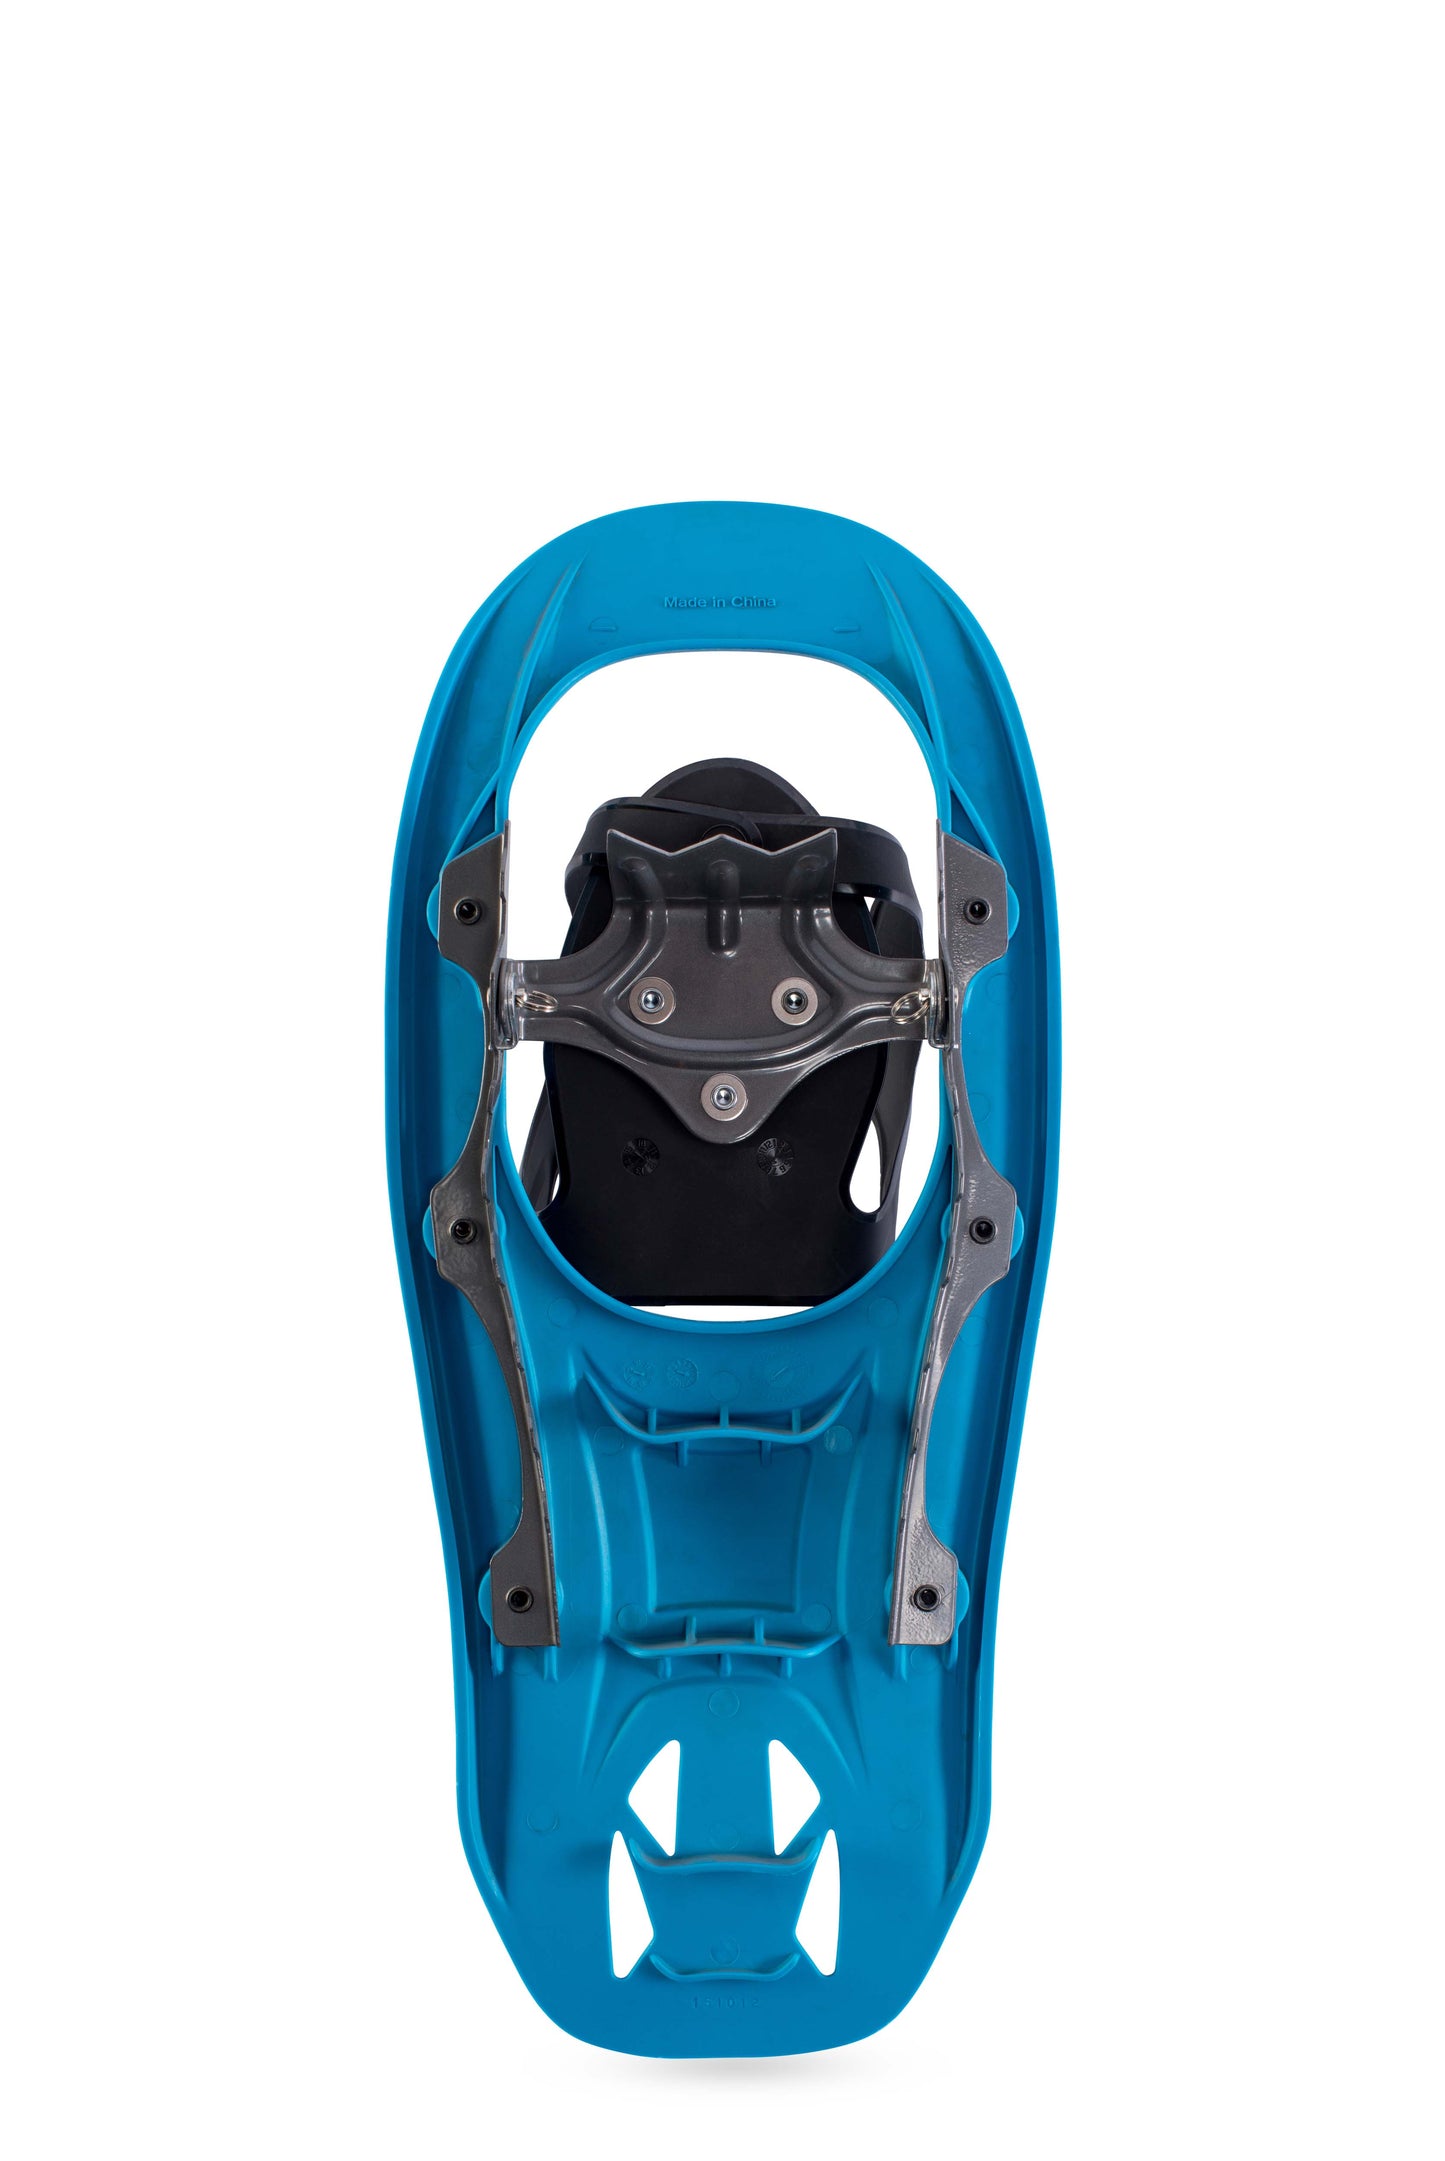 Tubbs Flex Junior Youth Snowshoes